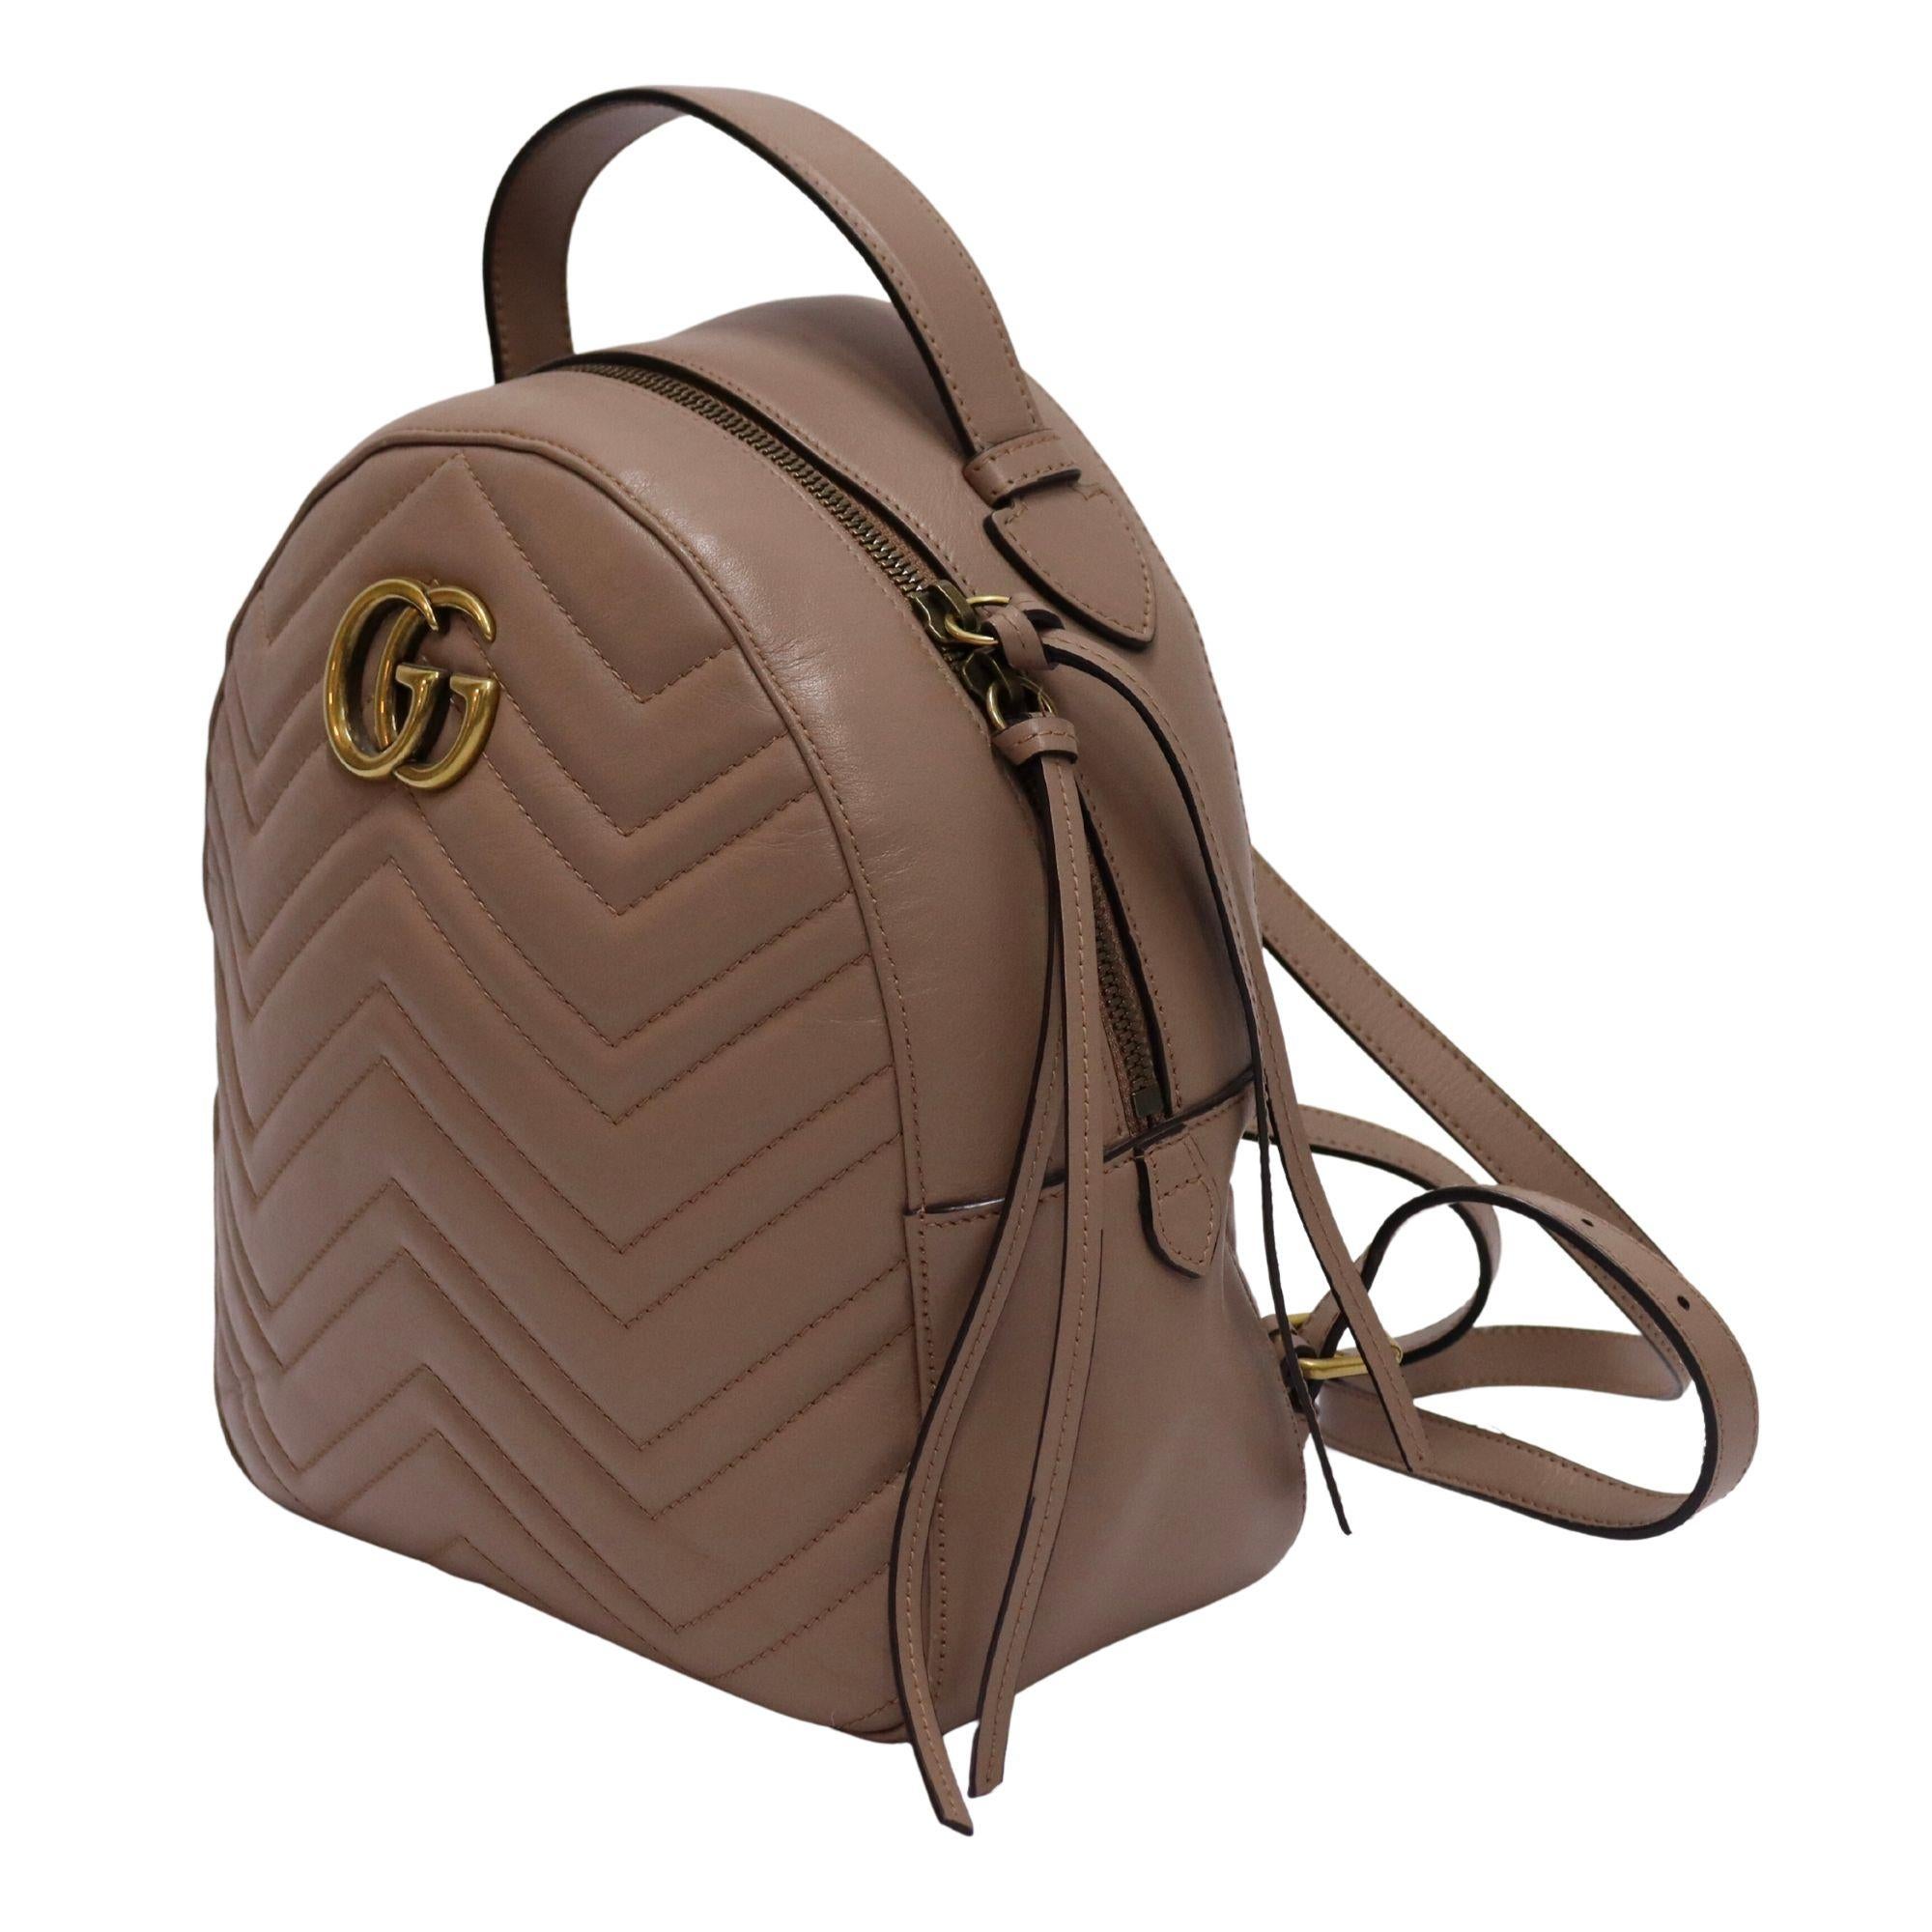 Gucci Beige marmont backpack. Feauting chevron quilting and antique finish hardware. GG gold logo detail in the front, with one slide pocket on the inside.

Additional information:
Material: Leather
Hardware: Gold
Measurements: 22 W x 10.5 D x 24 H